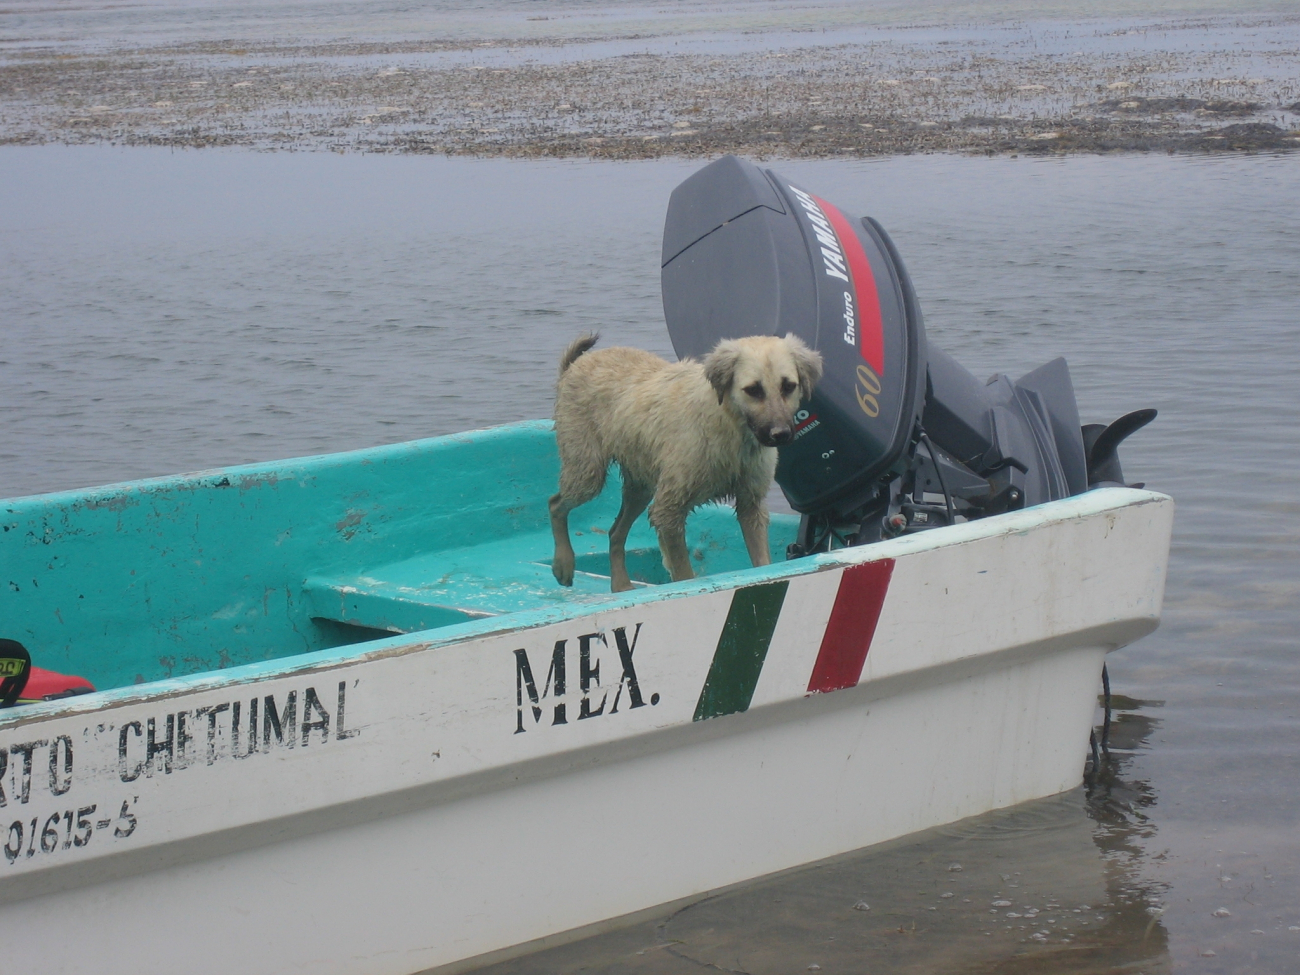 Captain Dog watches over his master's boat